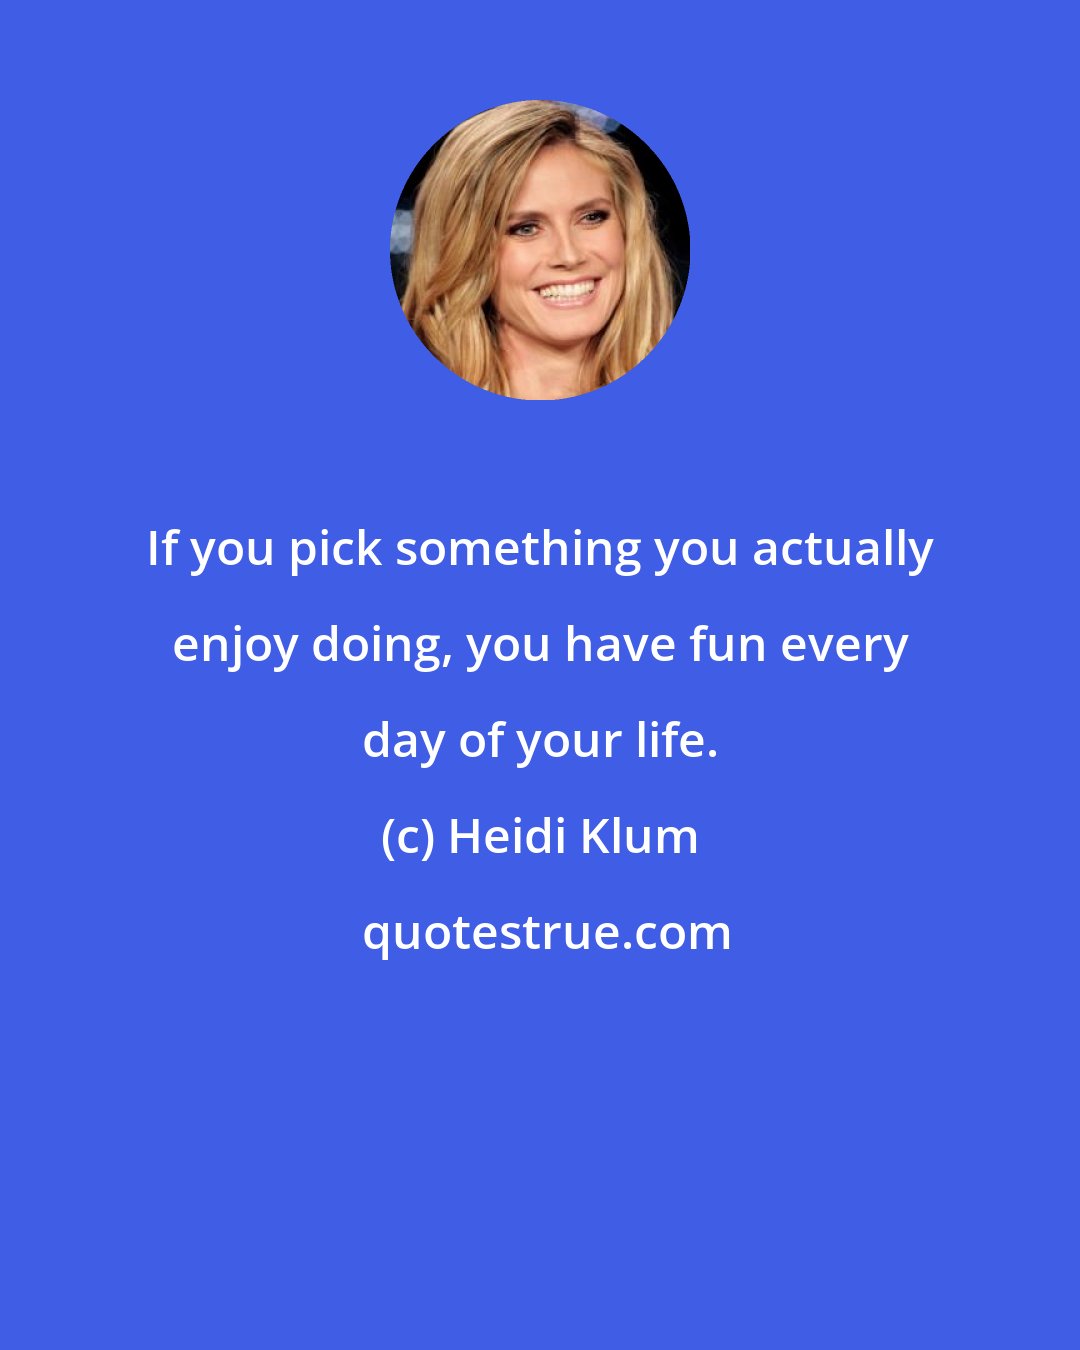 Heidi Klum: If you pick something you actually enjoy doing, you have fun every day of your life.